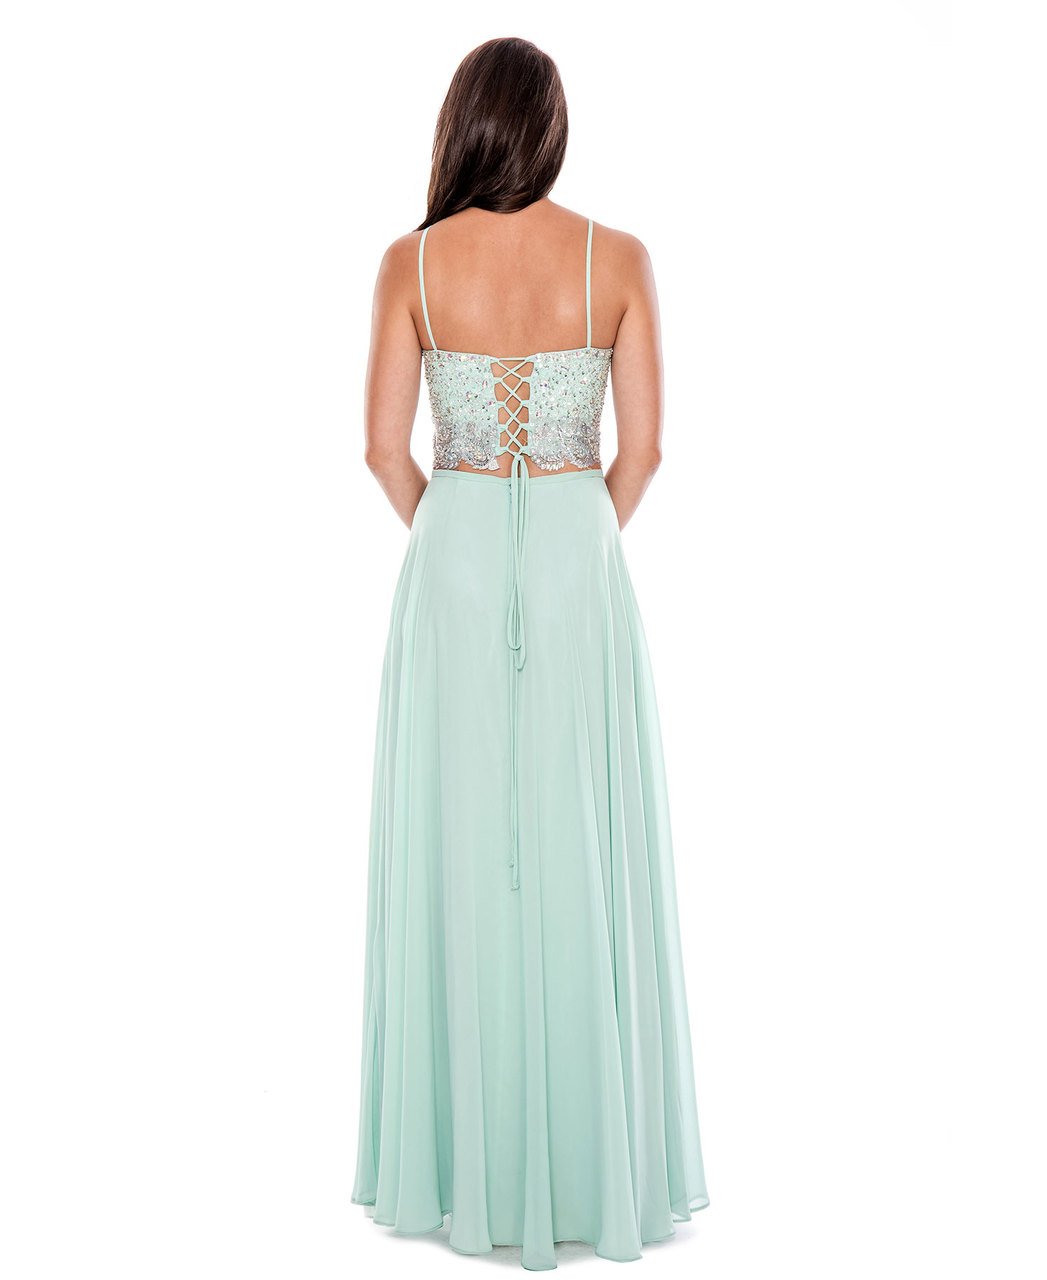 Decode 1.8 - Two-Piece Embellished Halter Neck Dress 182942 in Green